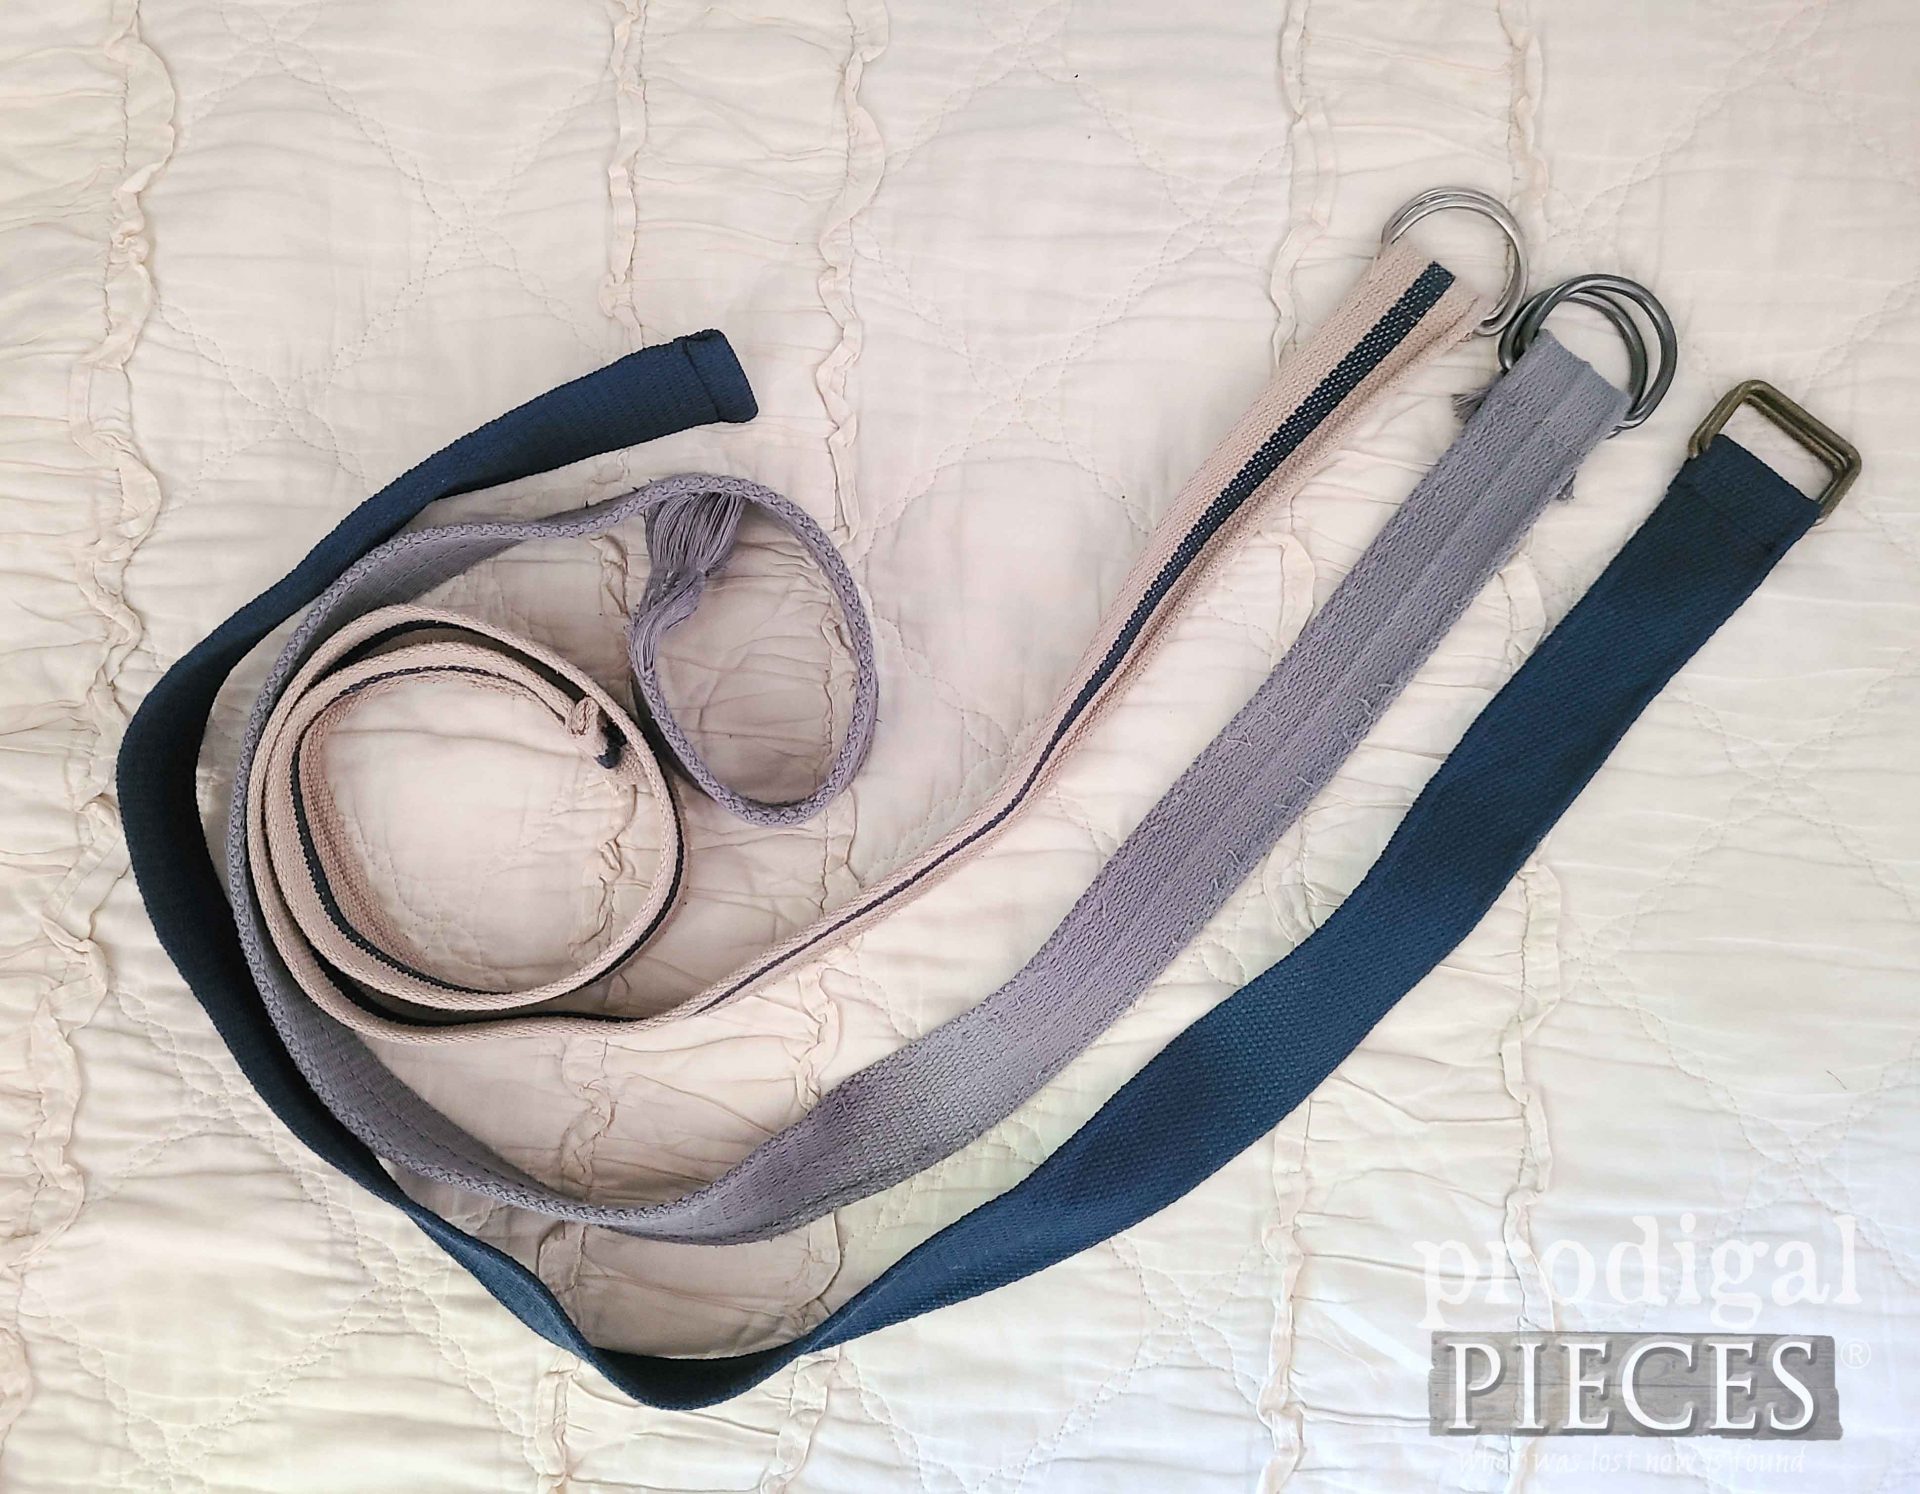 Thrifted Belts Before Refashion into DIY Blanket Carrier | Prodigal Pieces | prodigalpieces.com #prodigalpieces